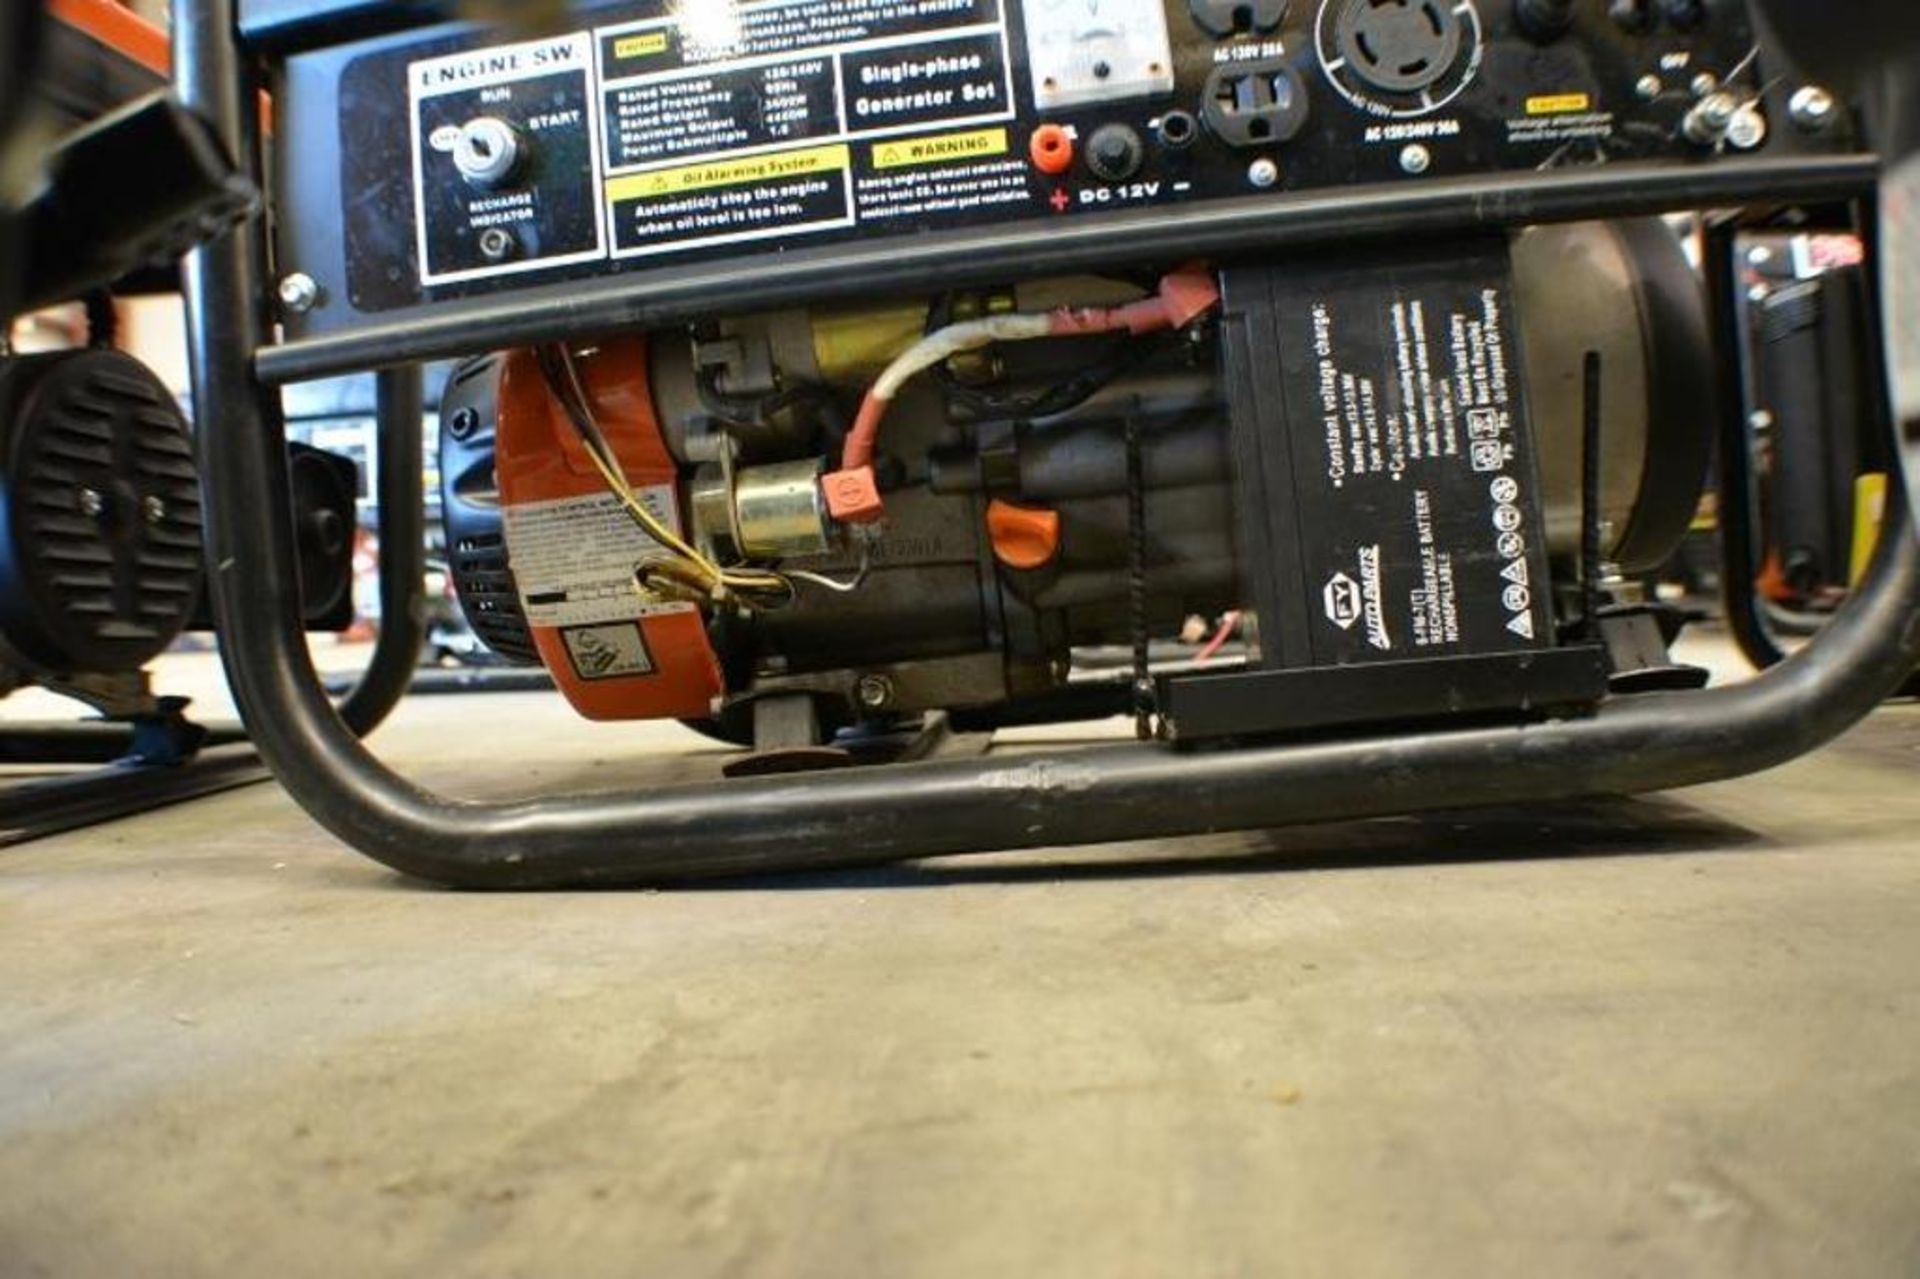 4400 Watts Gasoline Generator 6.5HP 120-240Volts with Electric Start by Powerland - Image 4 of 5